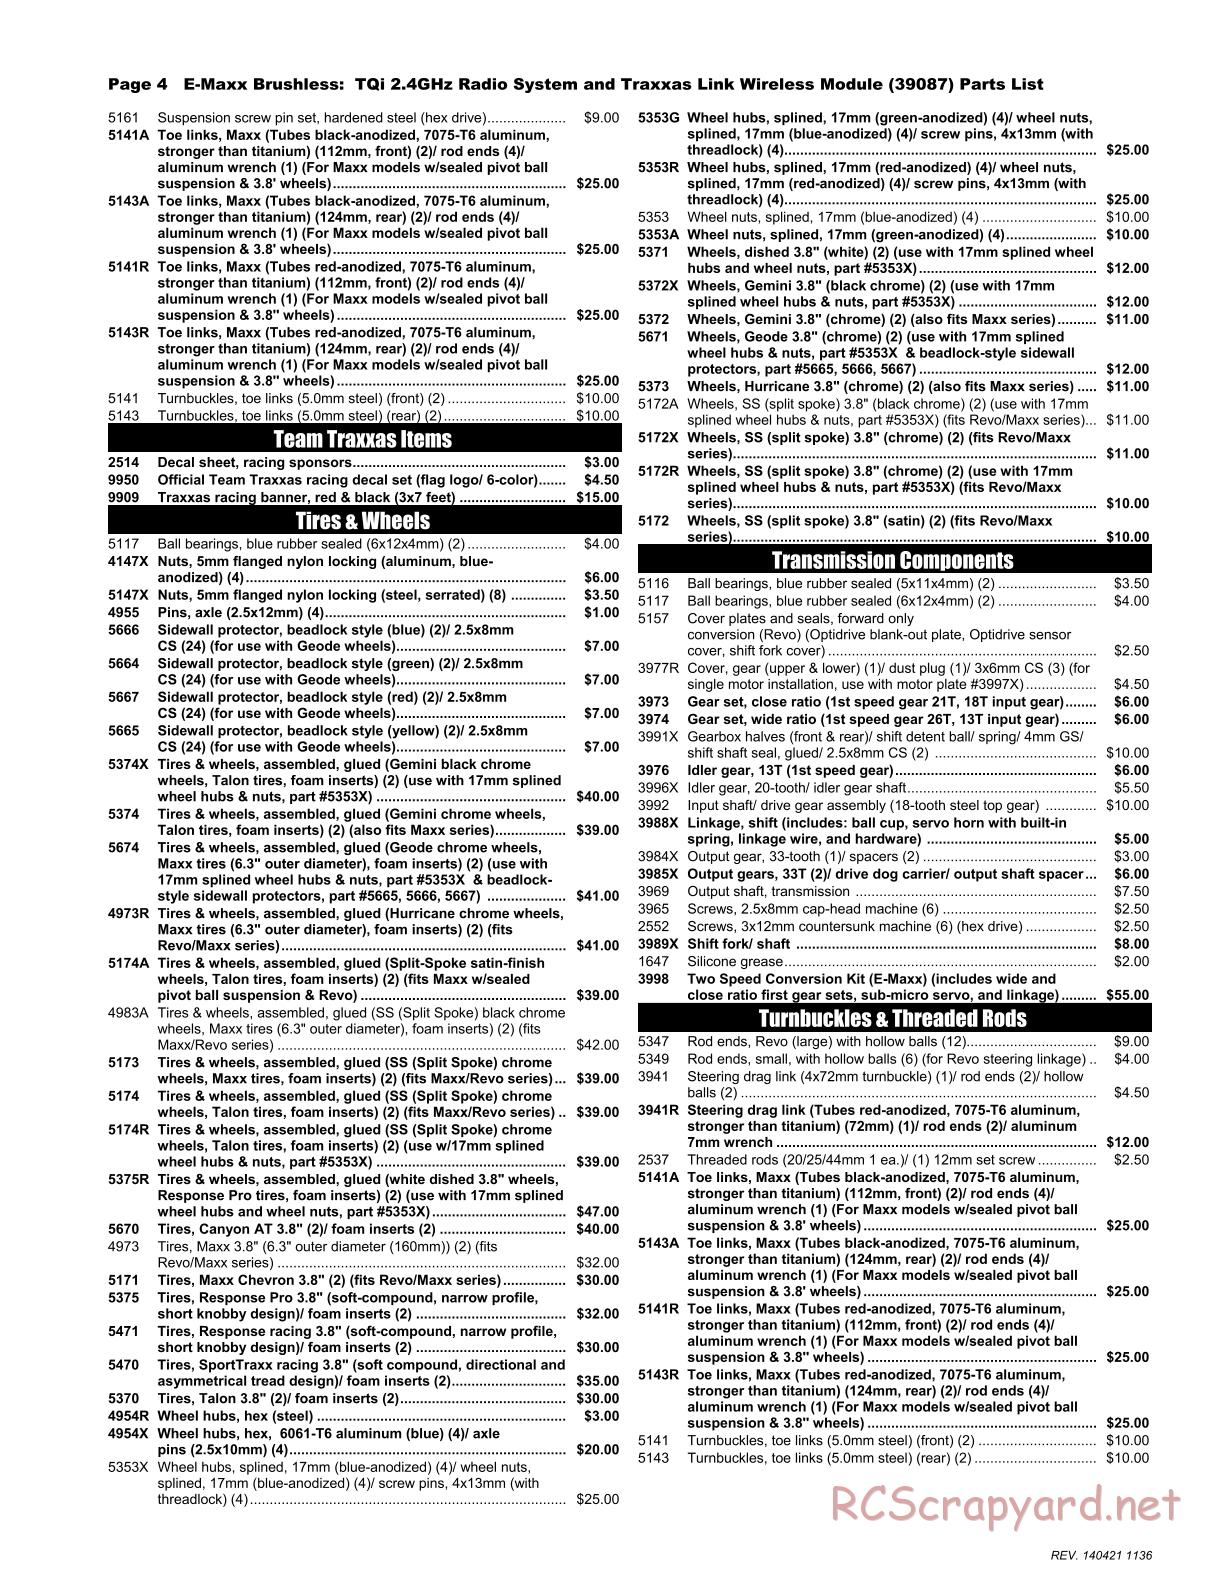 Traxxas - E-Maxx Brushless (2014) - Parts List - Page 4